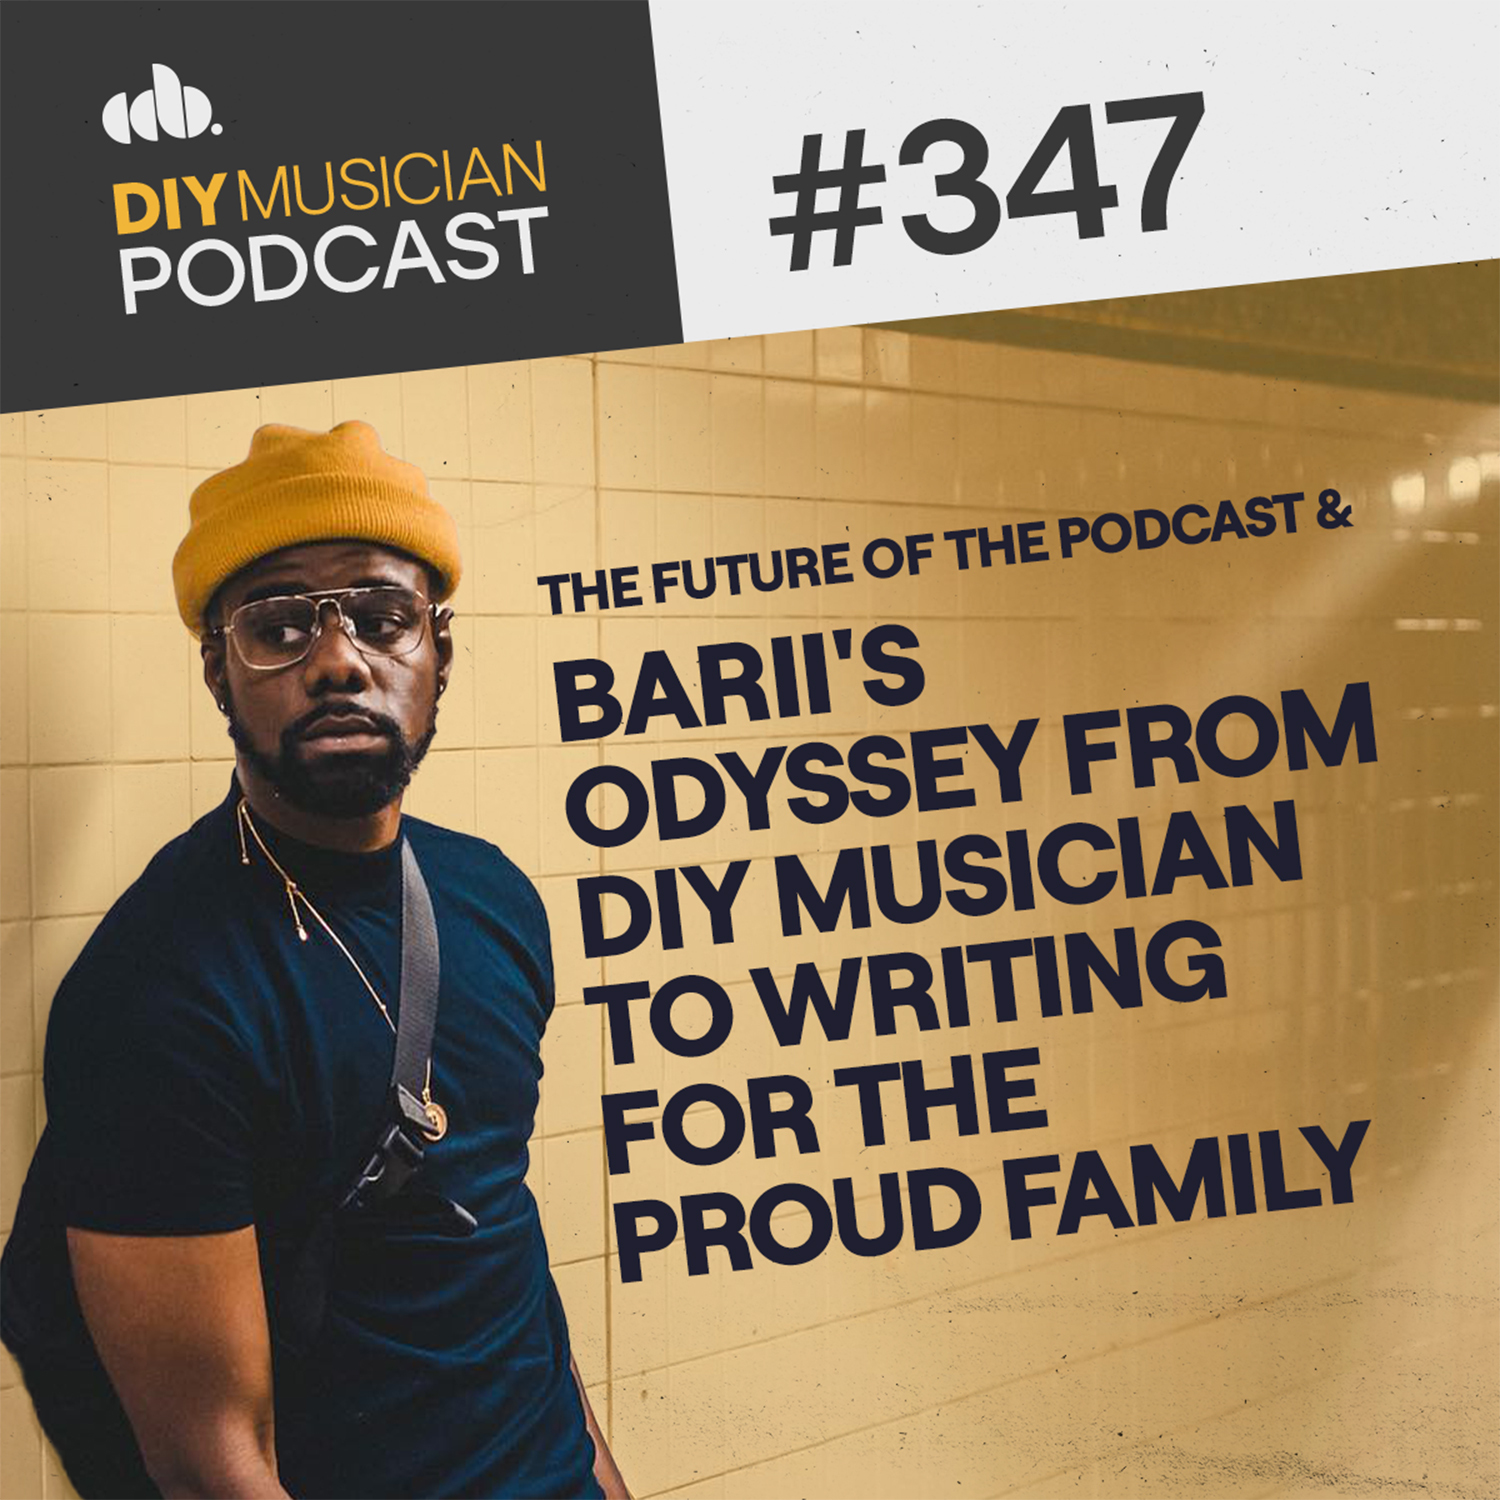 #347: The Future of the Podcast & BARii’s Odyssey from DIY Musician to Writing for The Proud Family thumbnail